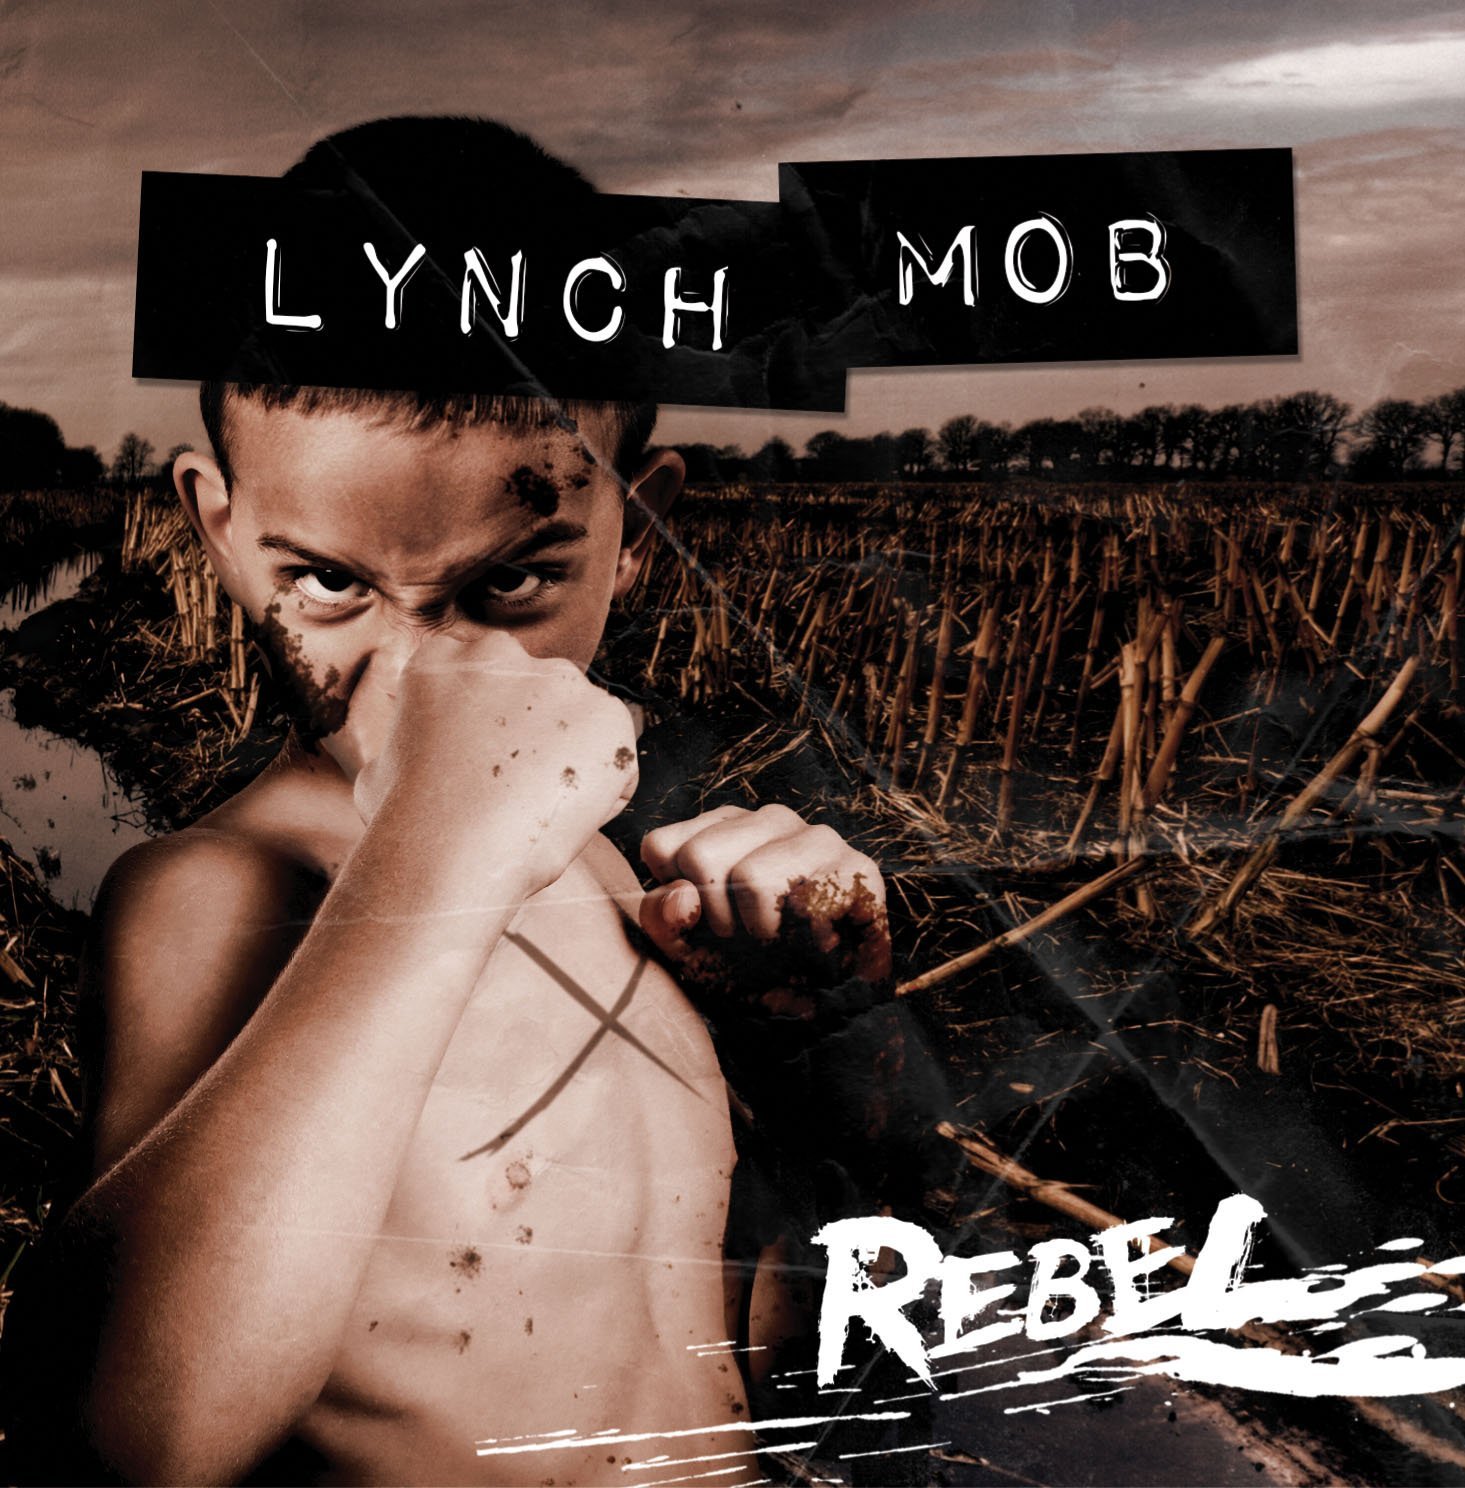 Lynch Mob – Mr. Scary Returns with the Modern Rock Sounds of Rebel!